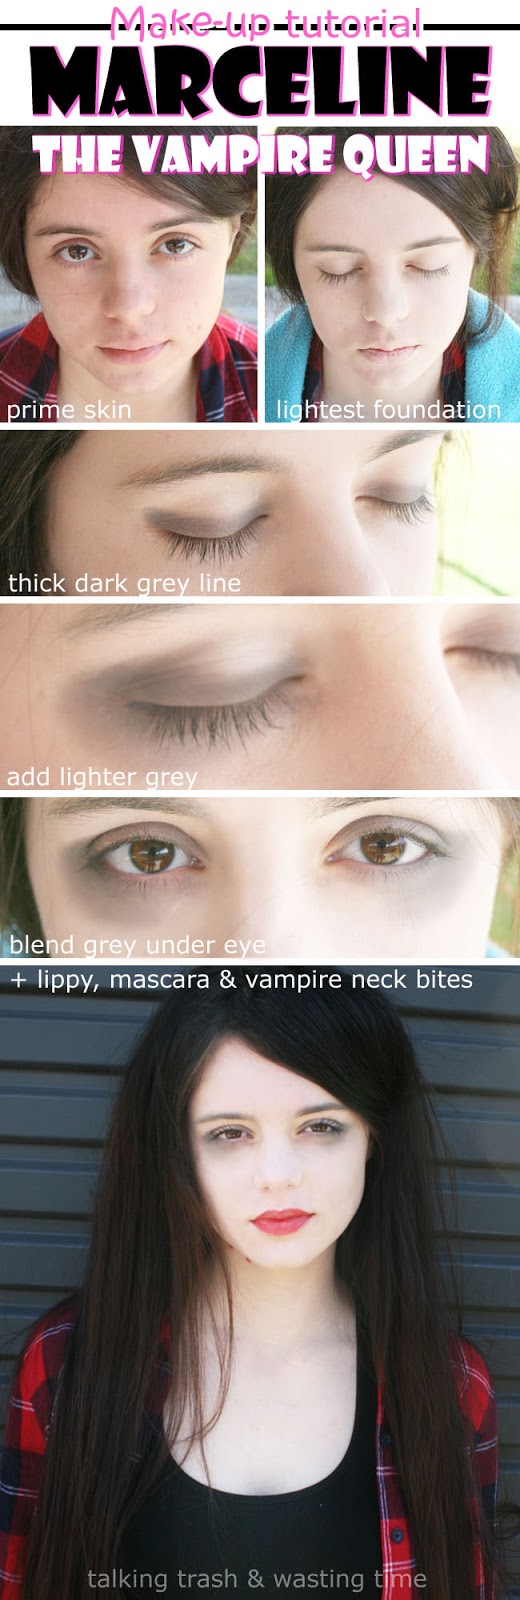 Sims 2 How To Make A Vampire Tutorial